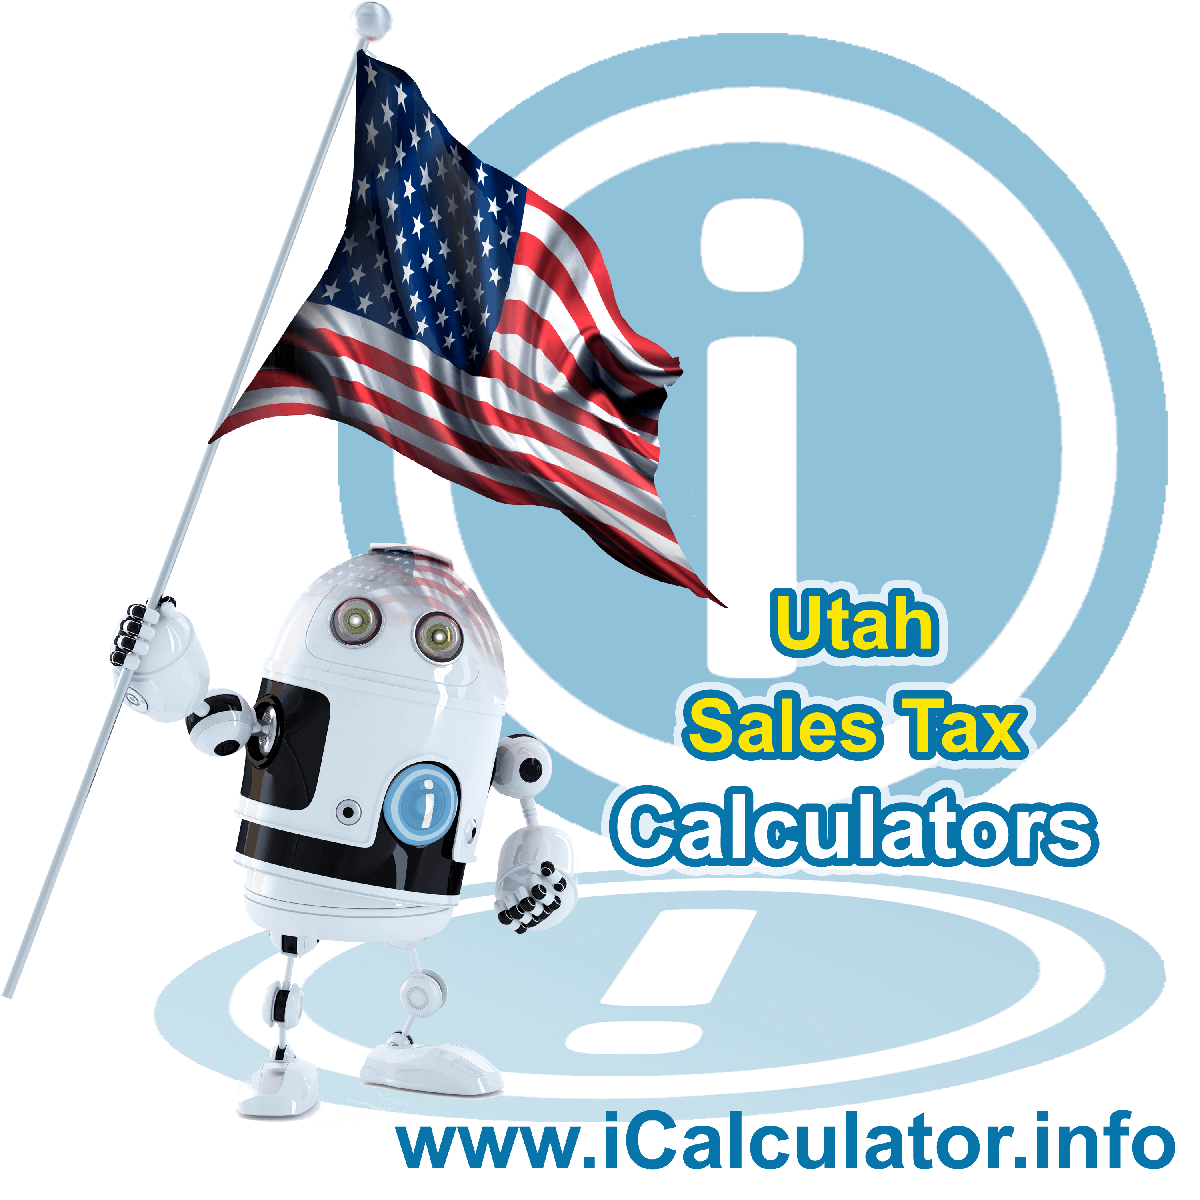 Grantsville Sales Rates: This image illustrates a calculator robot calculating Grantsville sales tax manually using the Grantsville Sales Tax Formula. You can use this information to calculate Grantsville Sales Tax manually or use the Grantsville Sales Tax Calculator to calculate sales tax online.